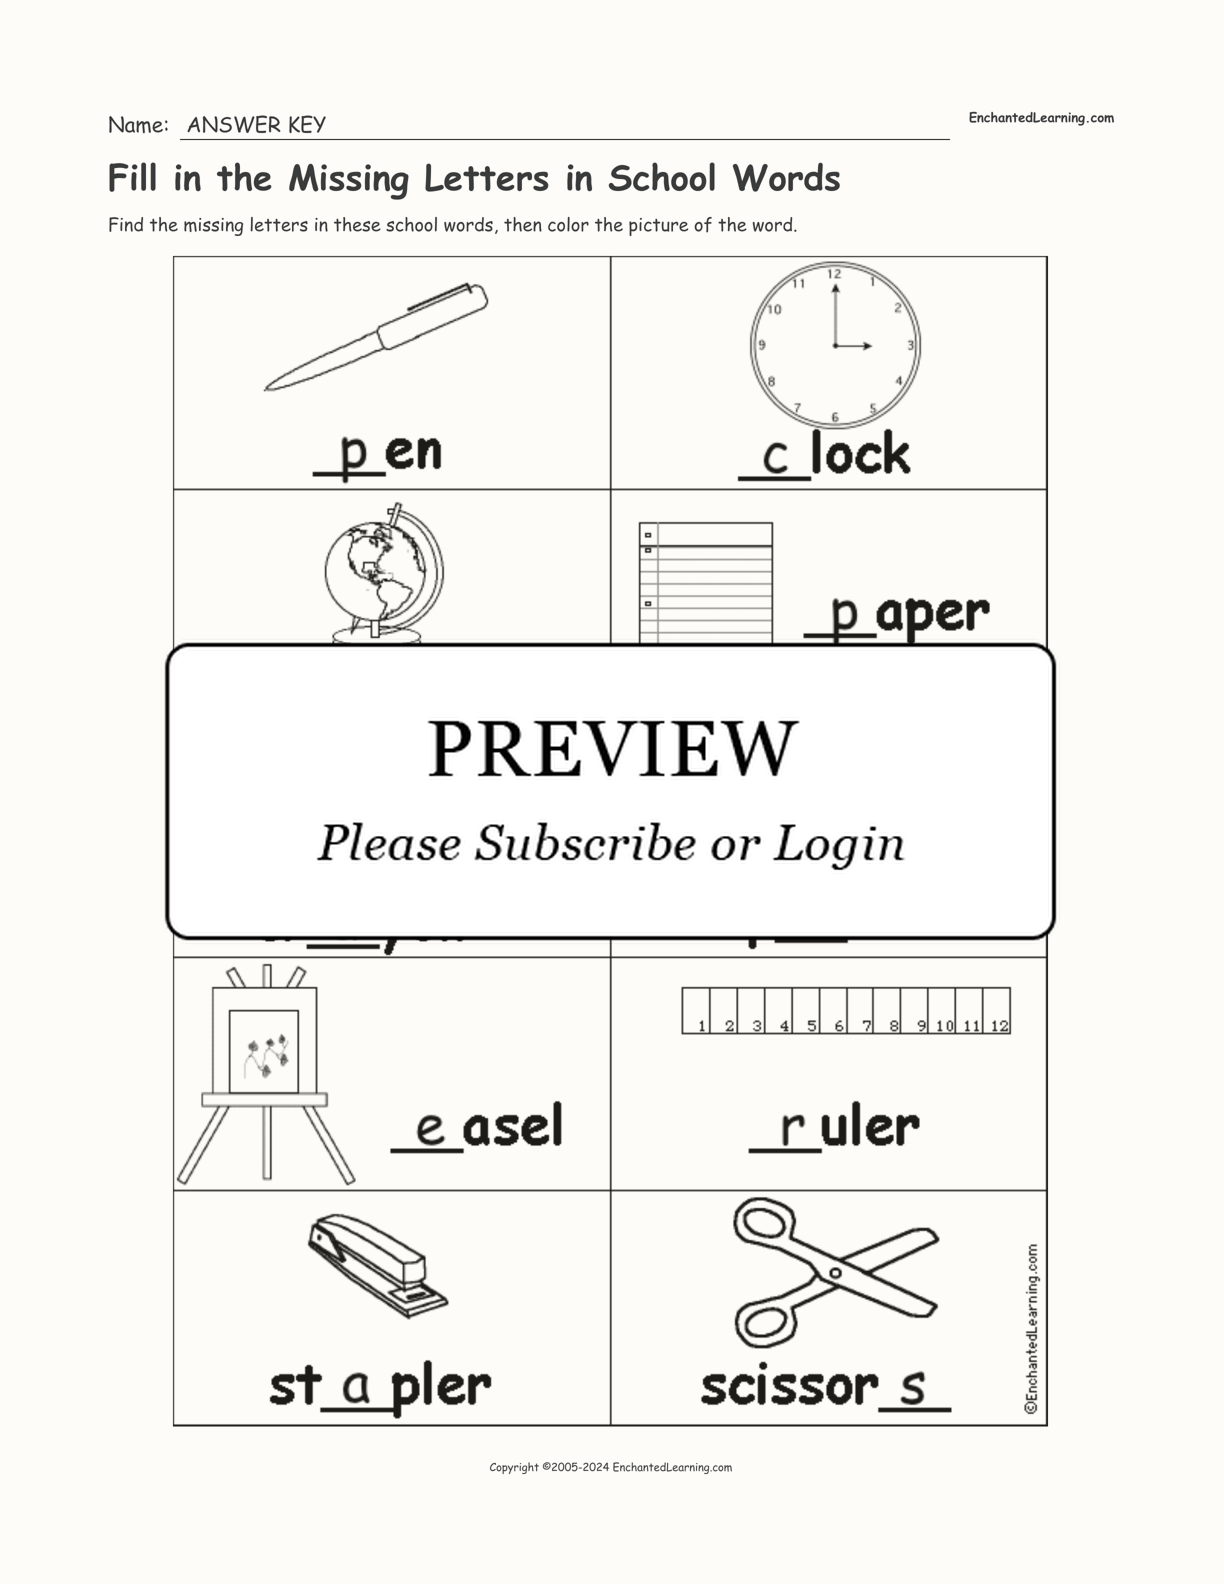 Fill in the Missing Letters in School Words interactive worksheet page 2